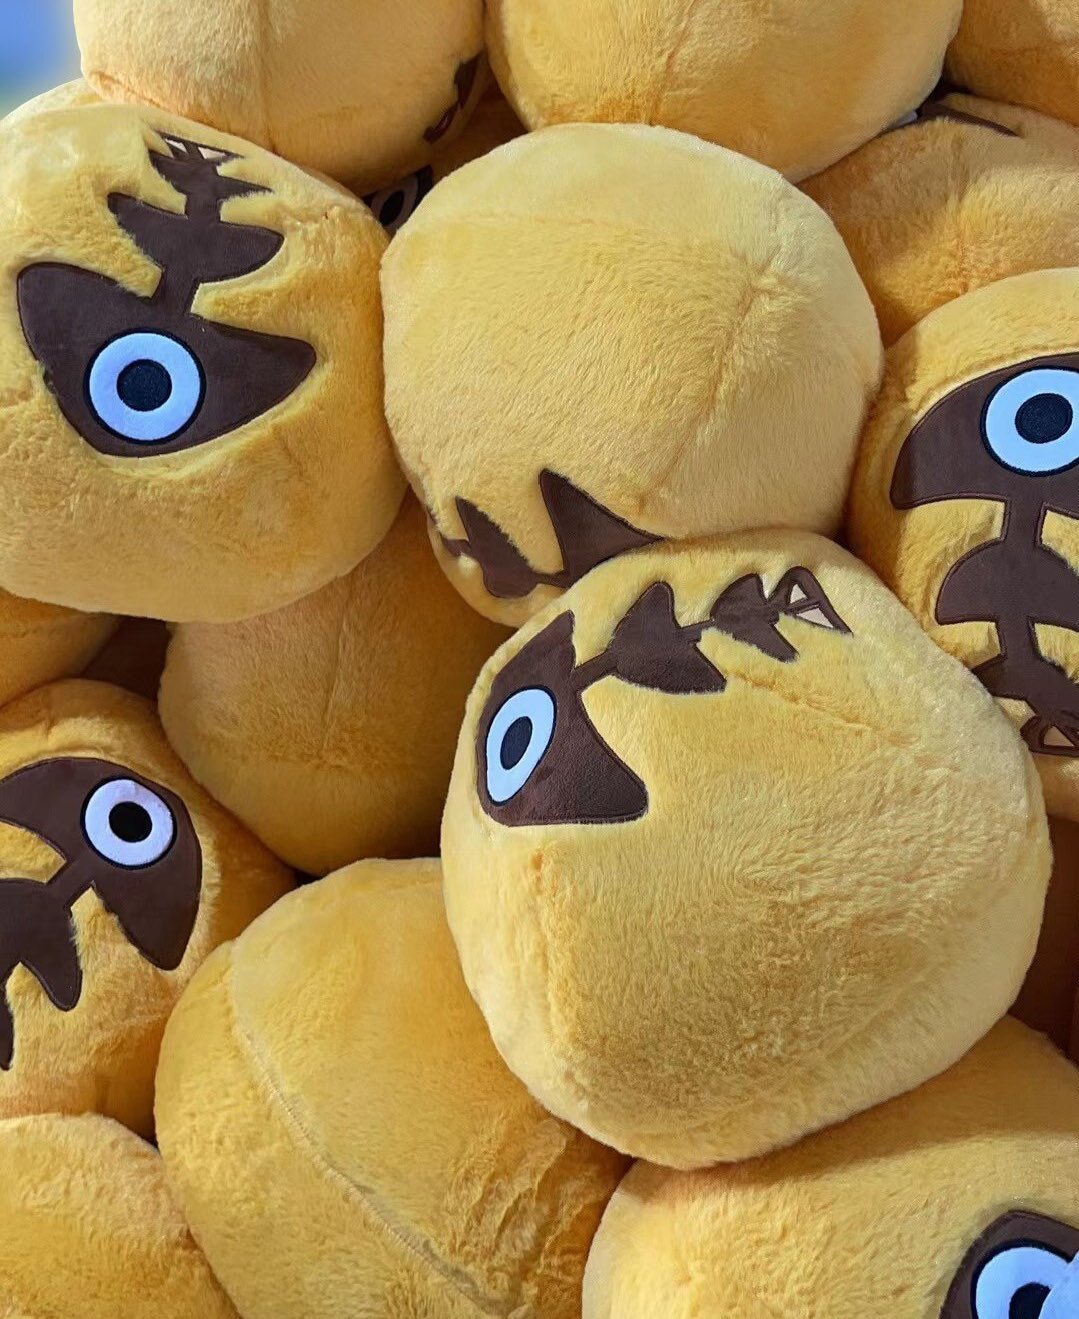 Cephalorock on X: The Egg plushie is here! You can buy them in